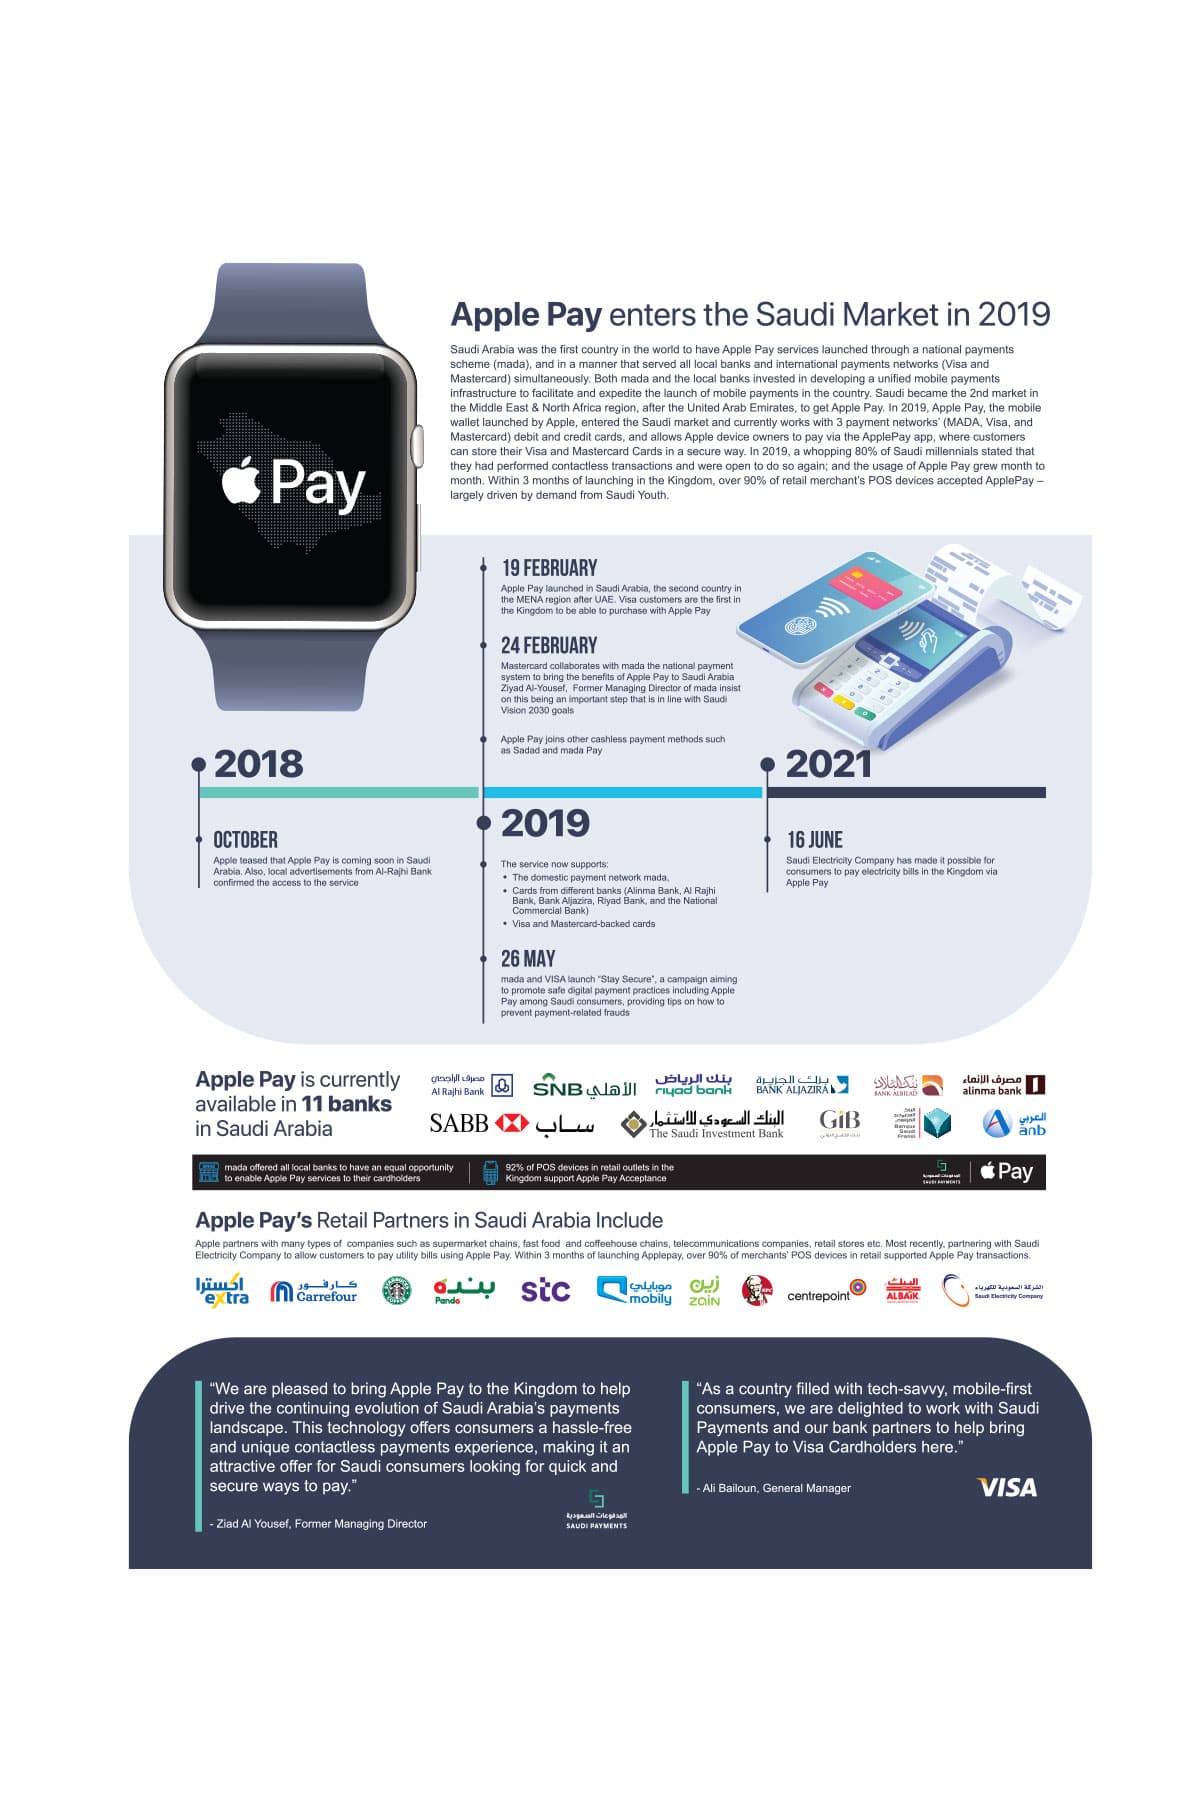 Apple pay enters the Saudi market in 2019